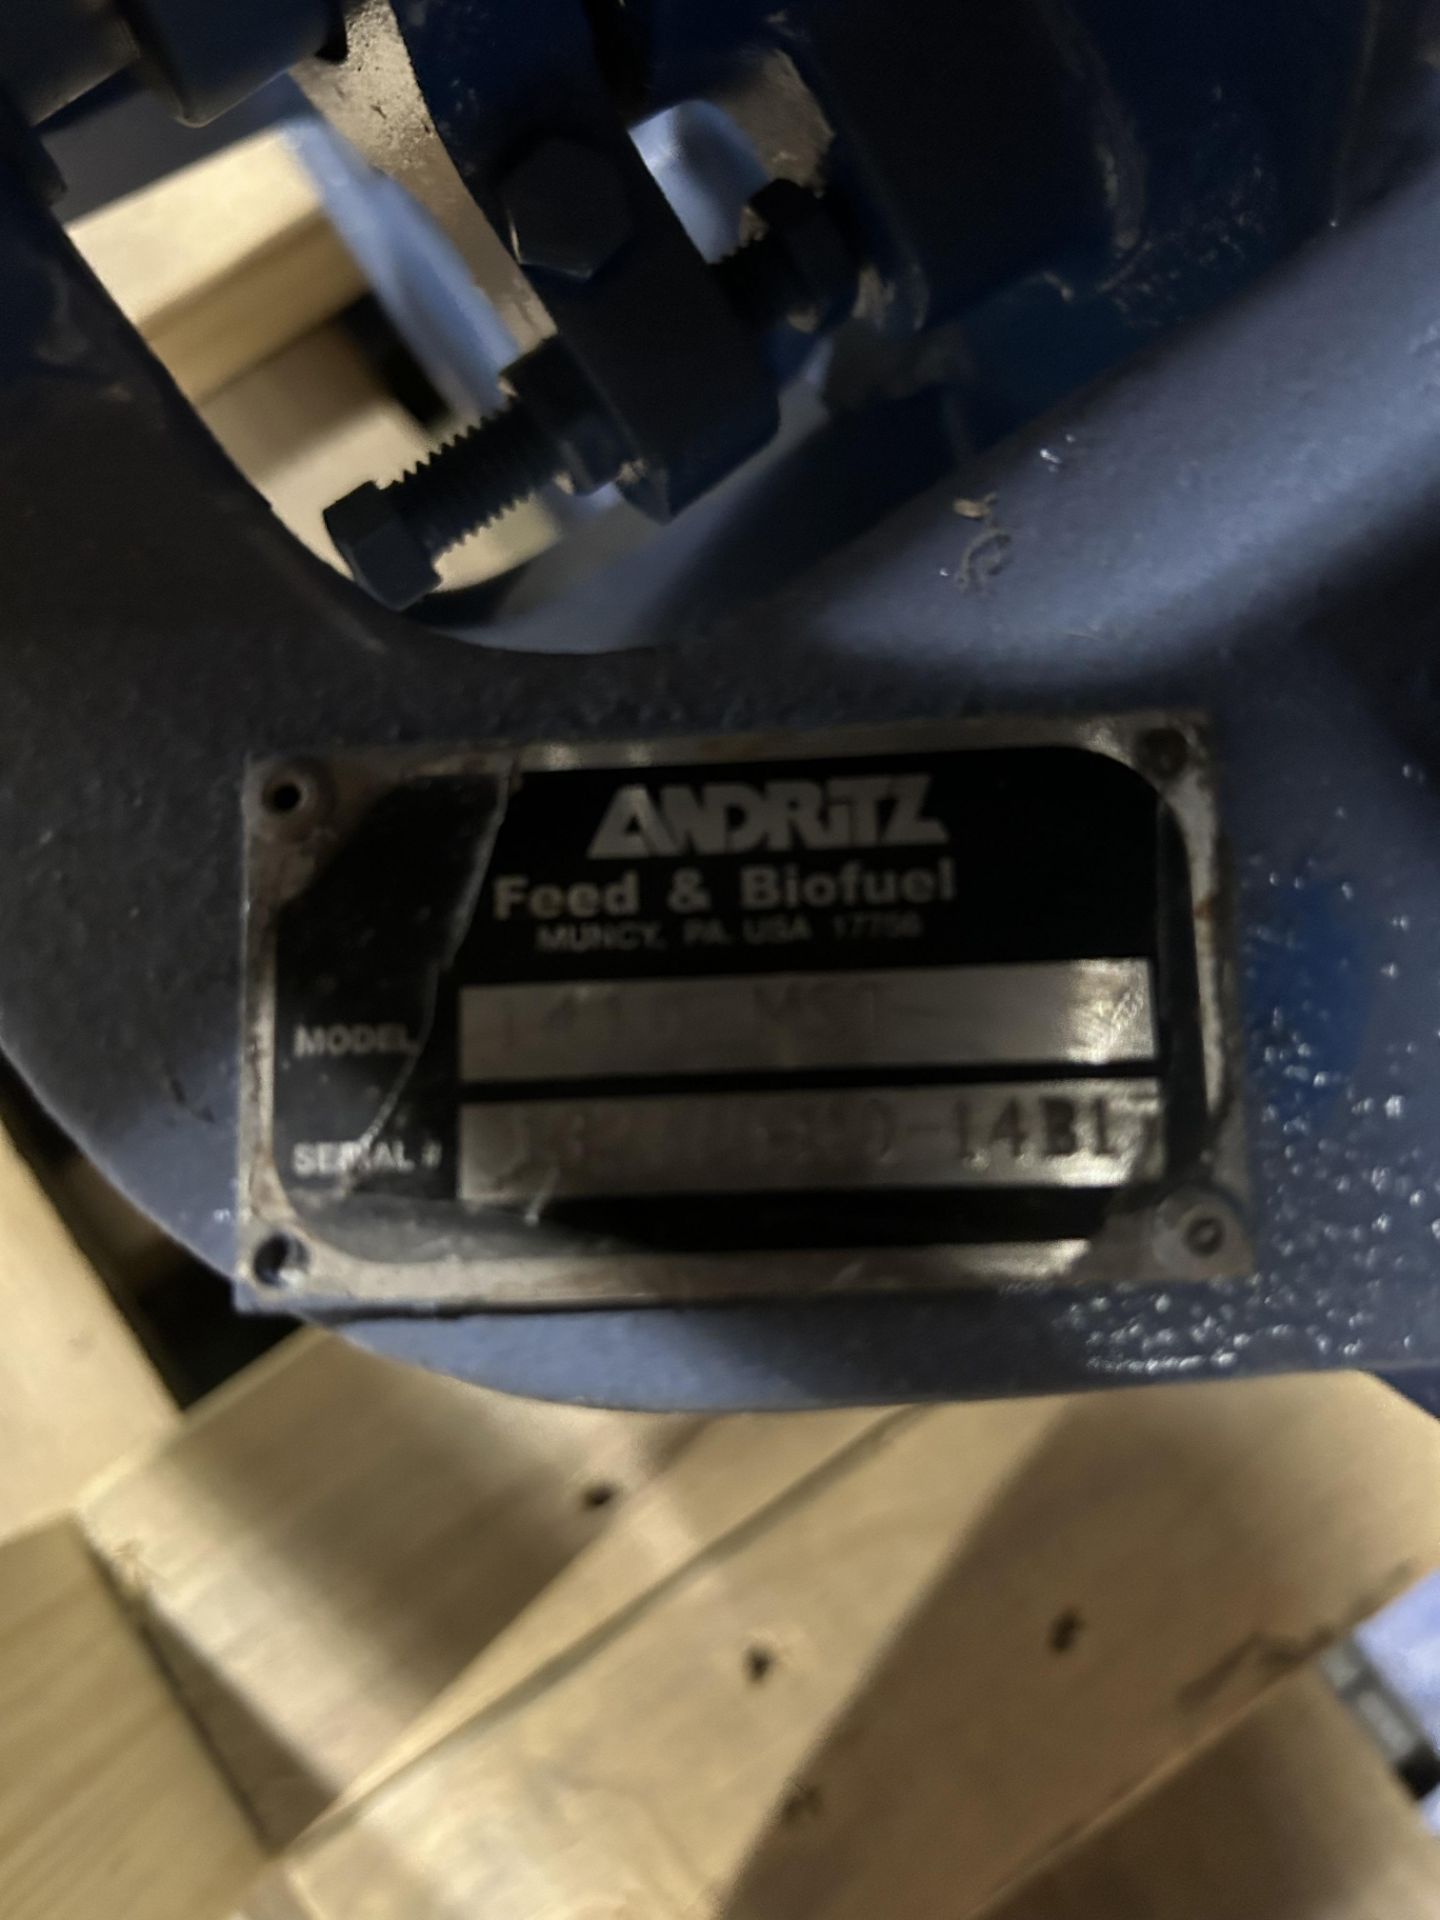 Andritz Rotary Valve , Rigging & Loading Fee: $125 - Image 5 of 9